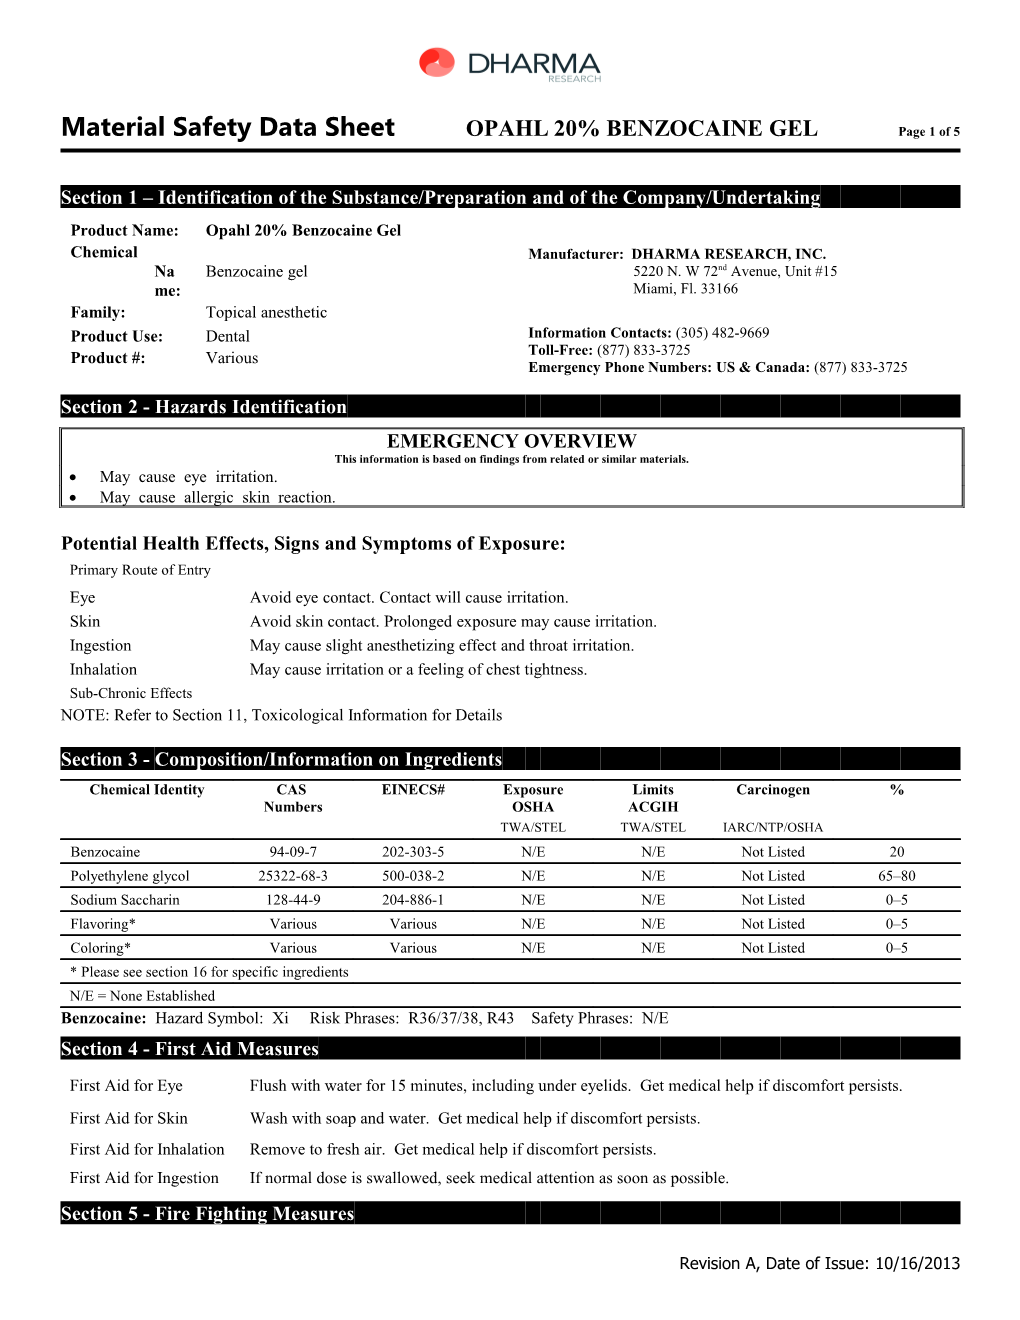 Material Safety Data Sheet OPAHL 20% BENZOCAINE GEL Page 5 of 5